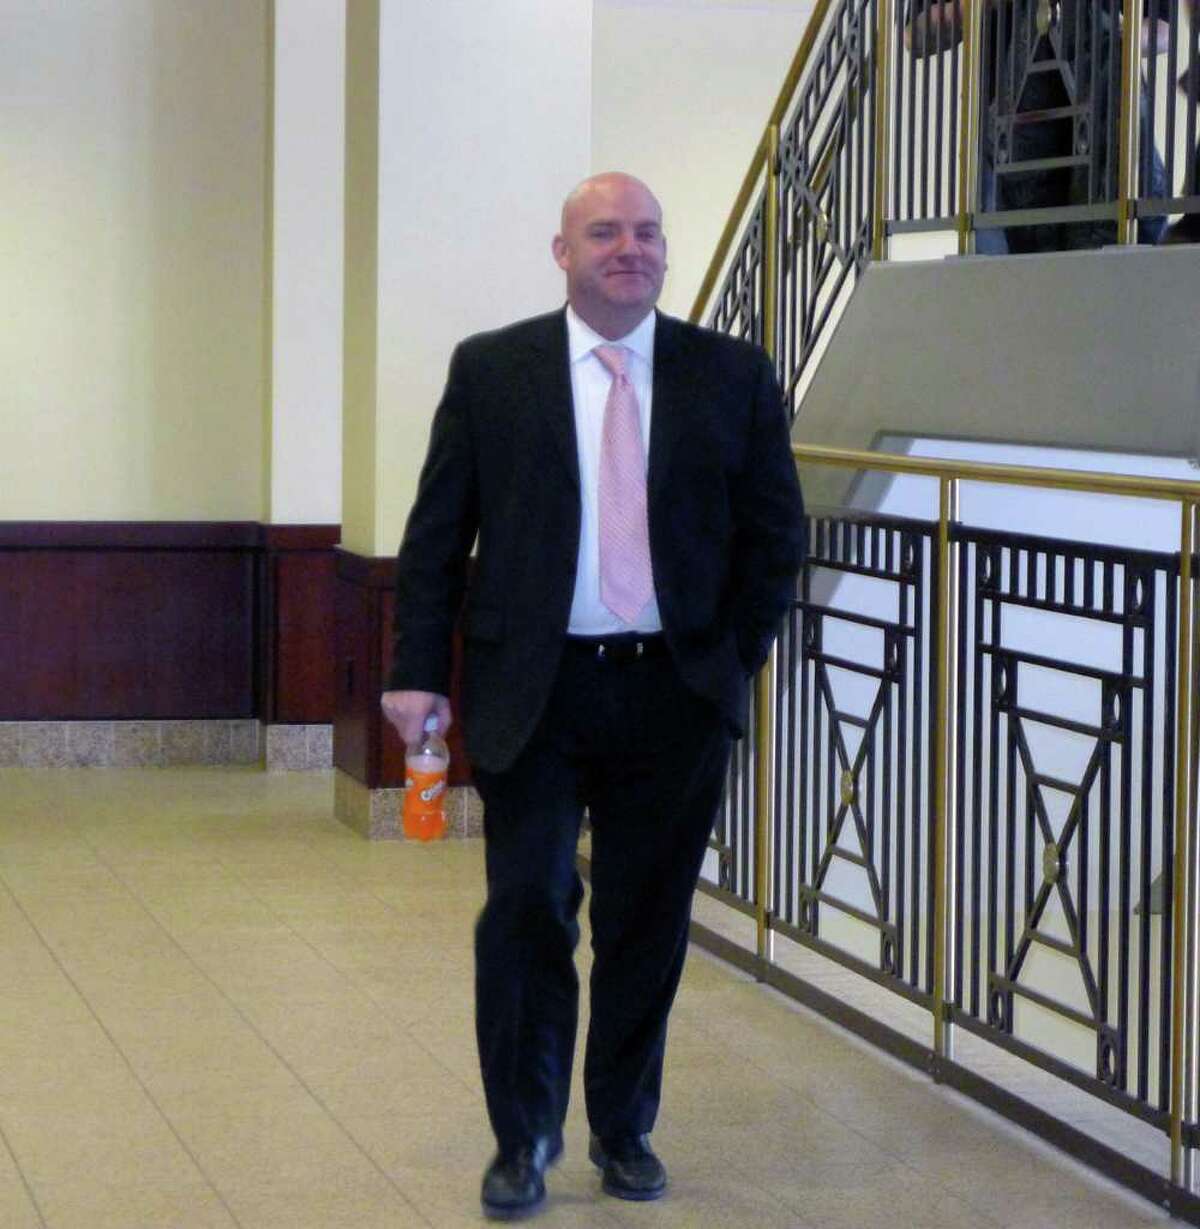 Albany Police Officer Robert E. Schunk makes his way in to Albany County Court Wednesday Feb. 9, 2011. Schunk, 39, a 12-year veteran of the Albany police force, is on trial for felony and misdemeanor charges .( Michael P. Farrell/Times Union )